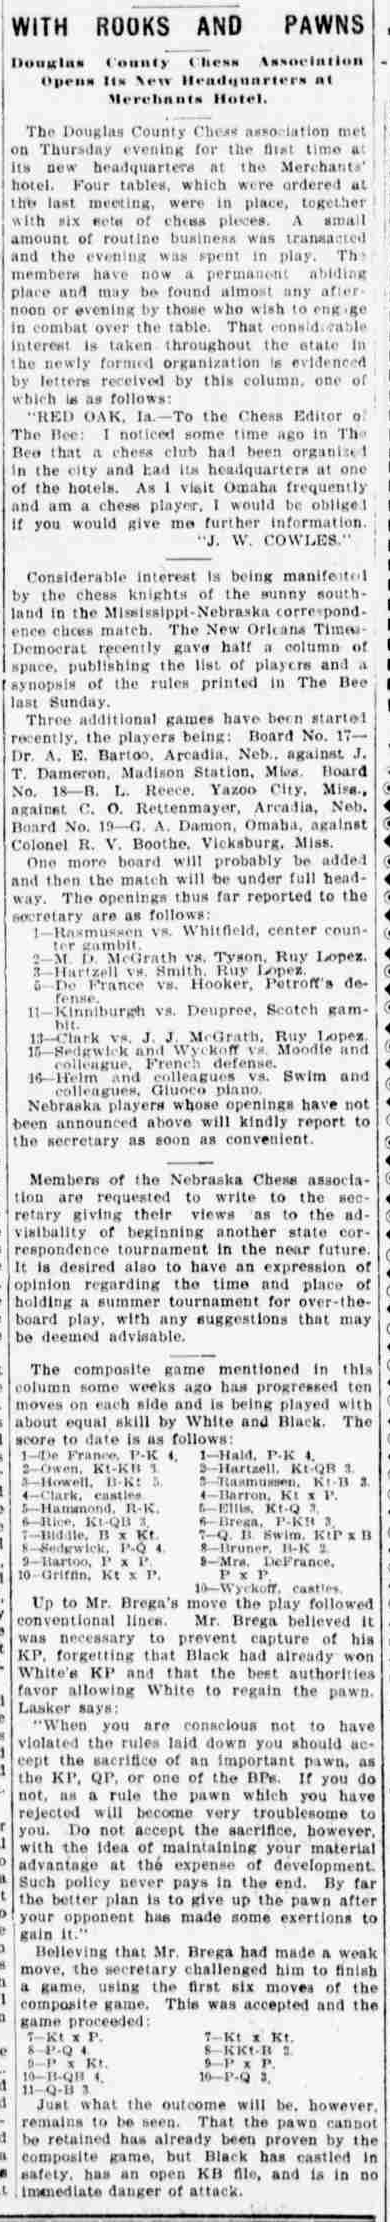 1900.04.29-01 Omaha Daily Bee.png